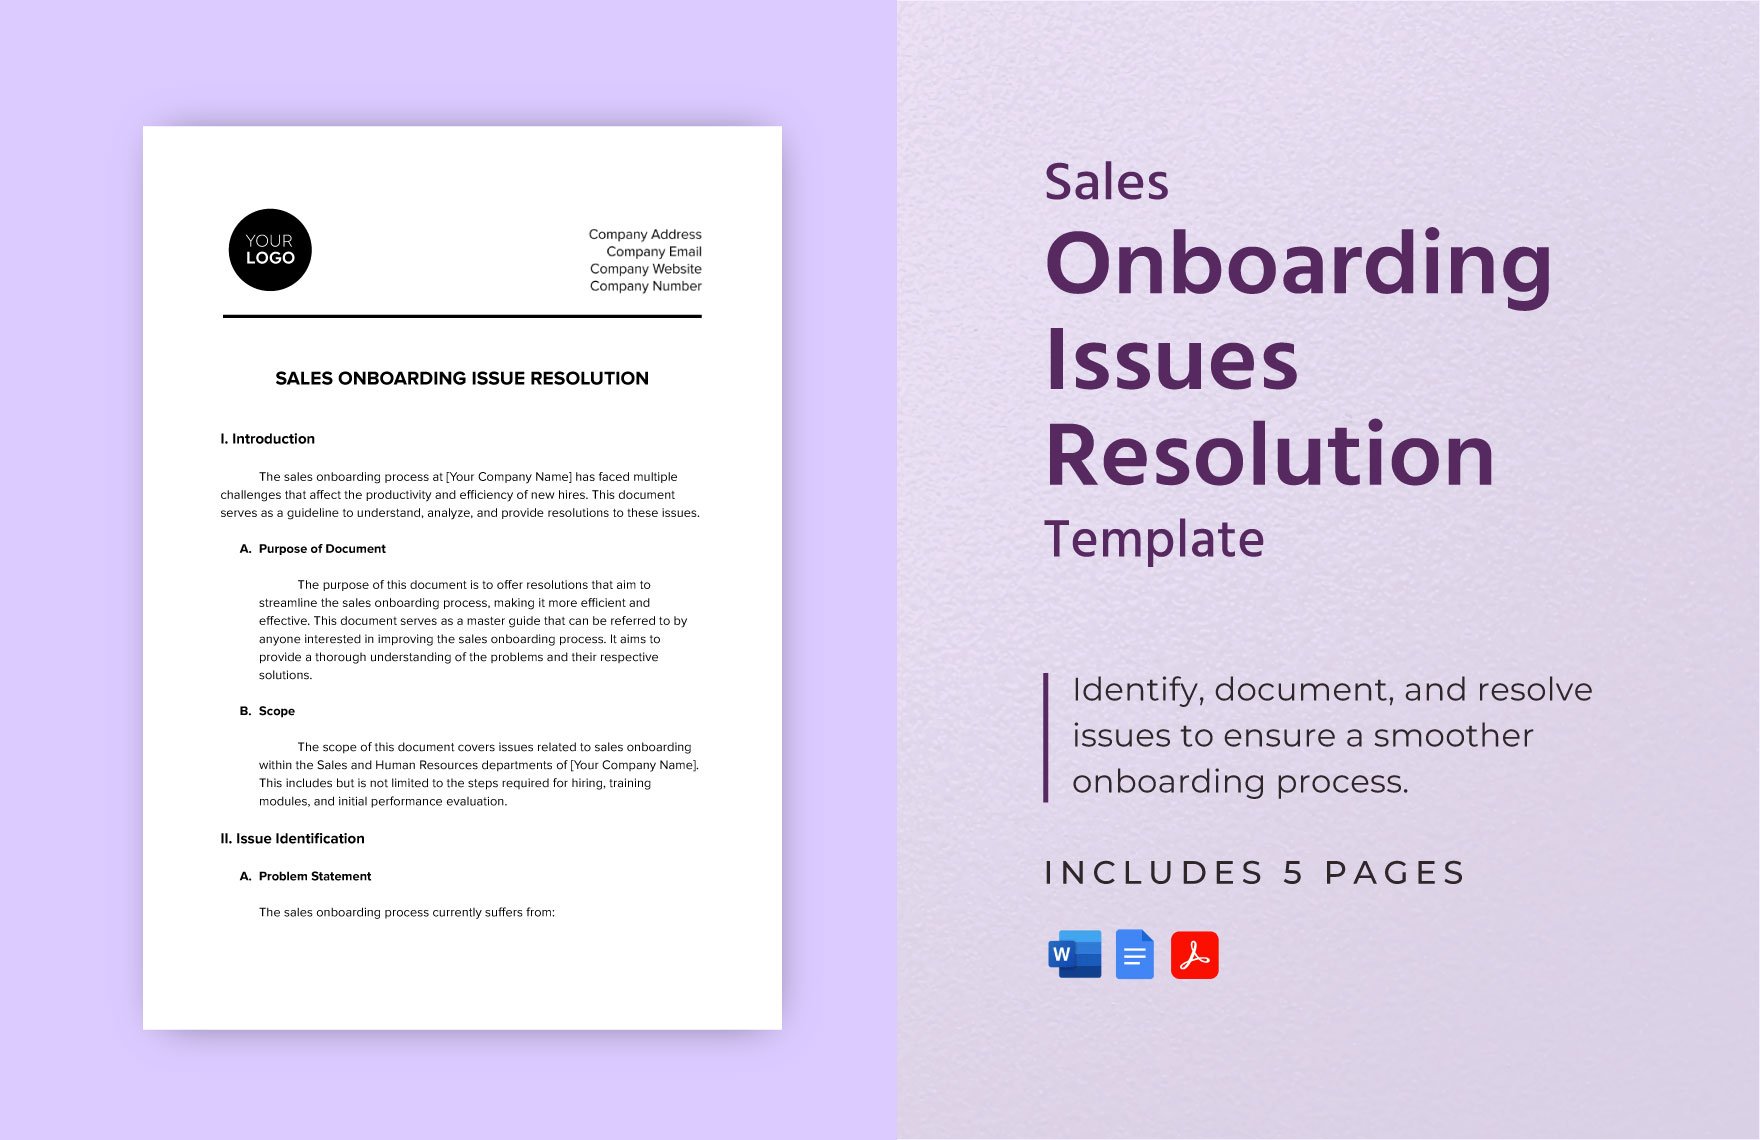 Sales Onboarding Issues Resolution Template in Word, Google Docs, PDF